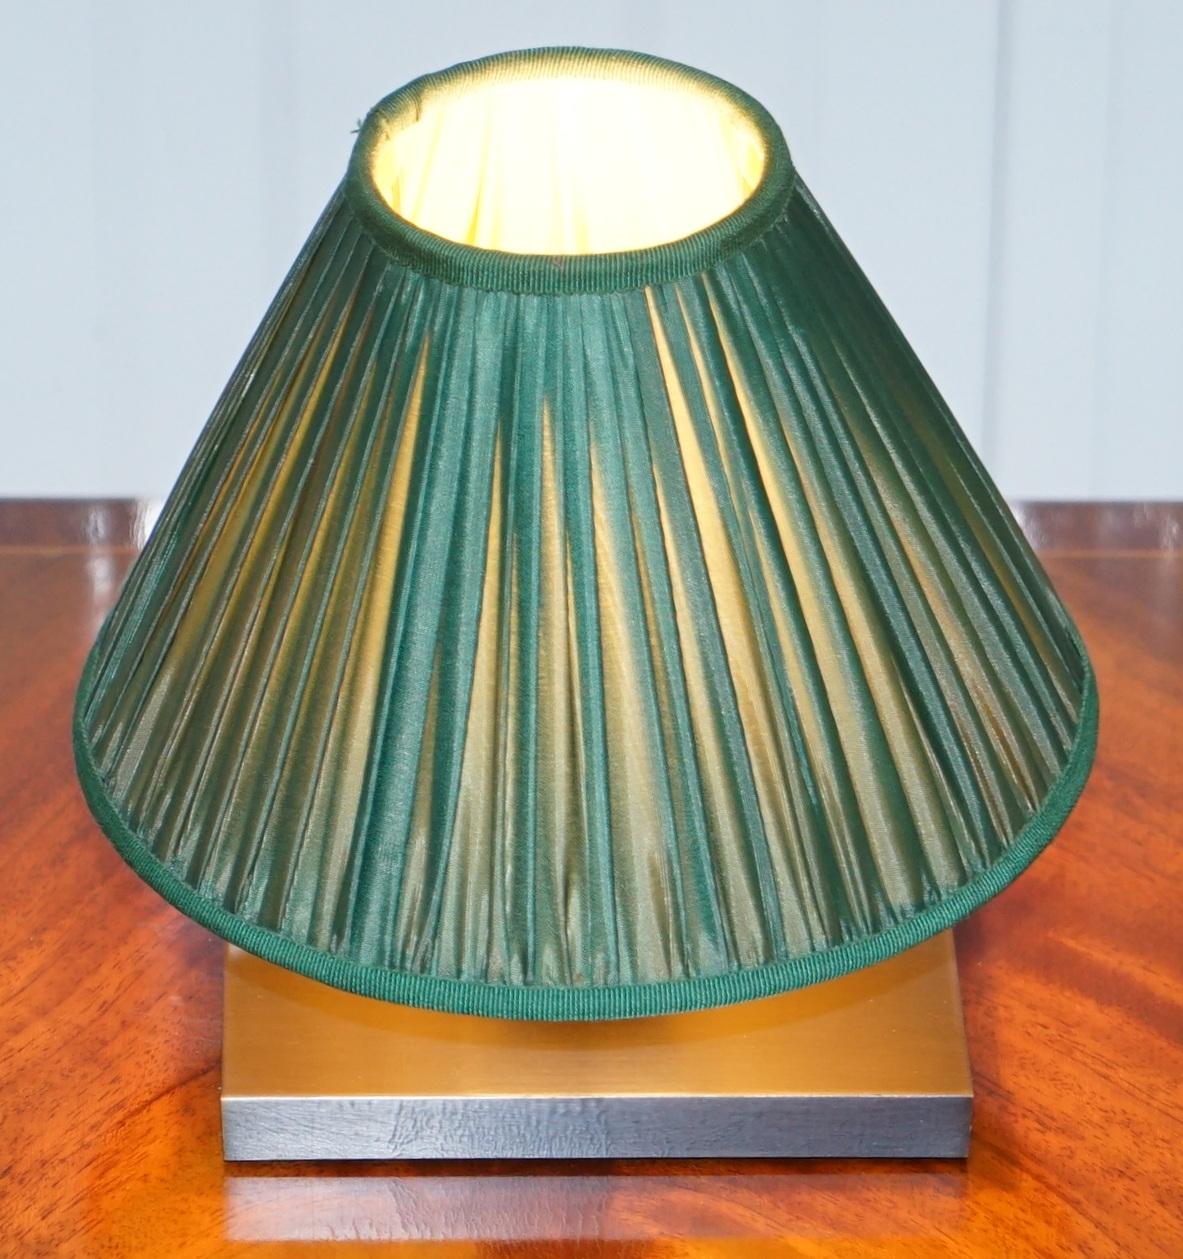 Modern Lovely Small Table Lamp with Cast Metal Base and Green Shade Good Light Transfer